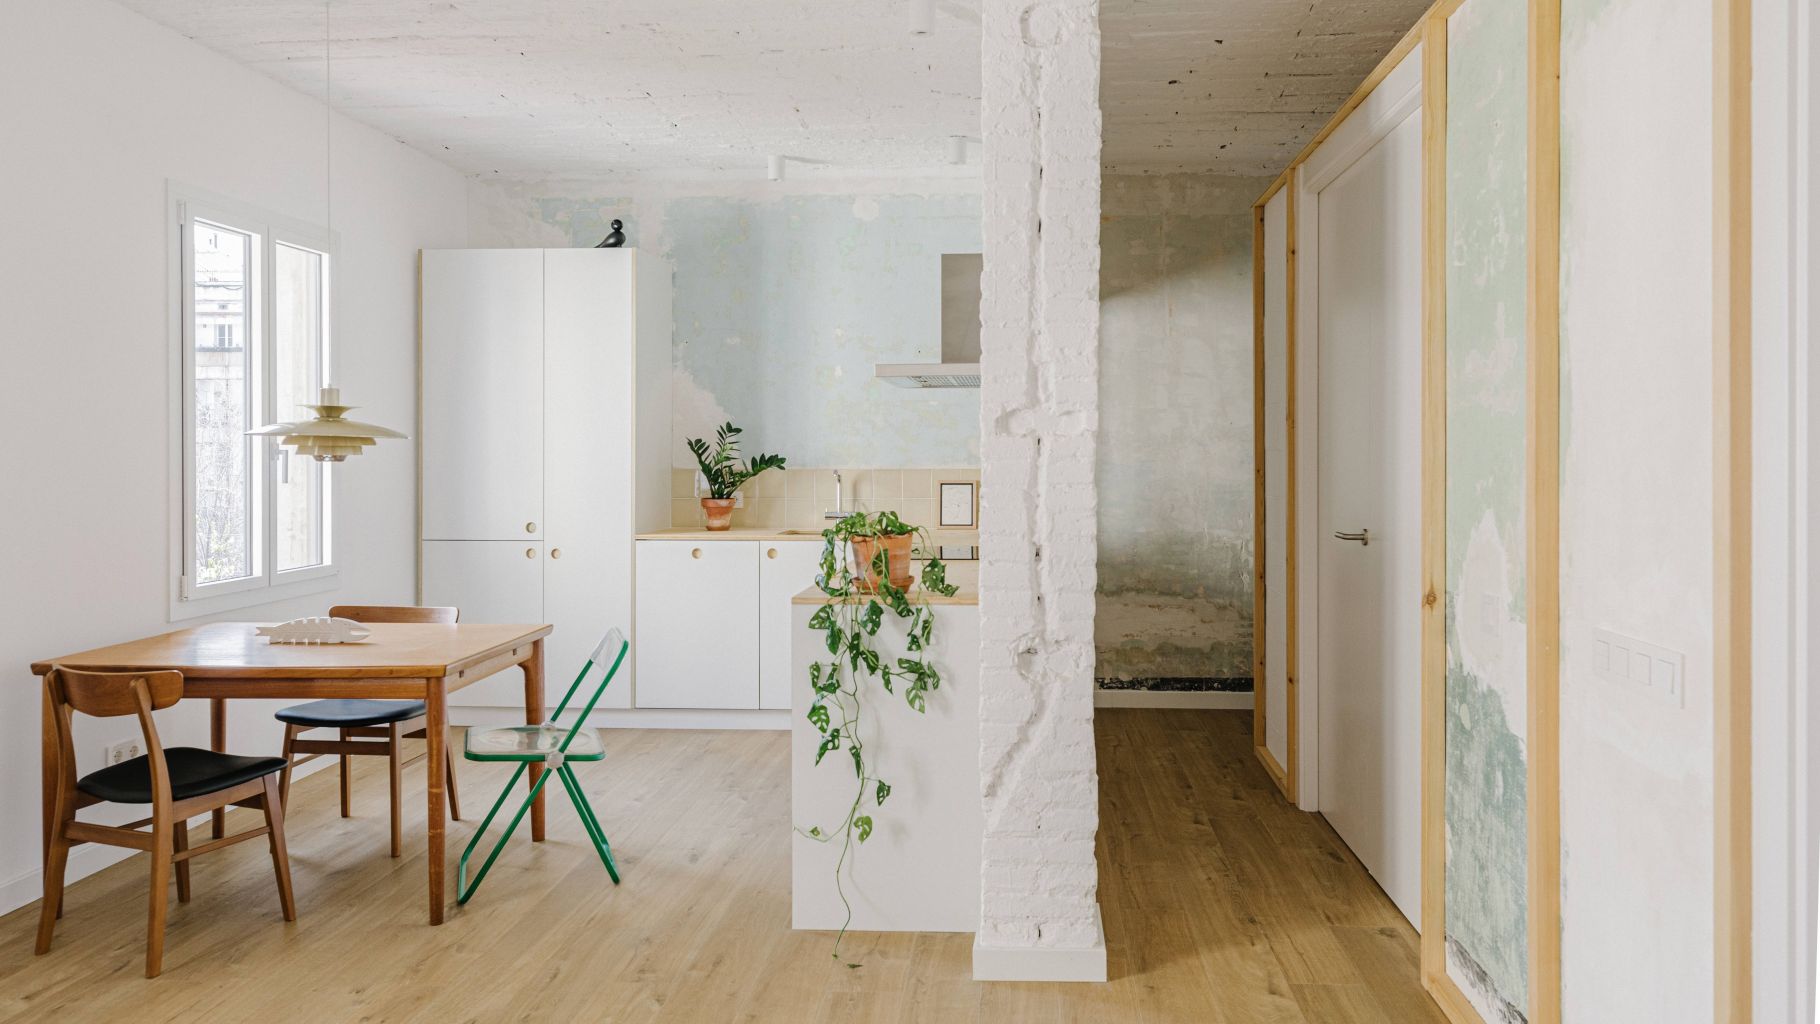 FULL RENOVATION OF A FLAT IN EIXAMPLE 1